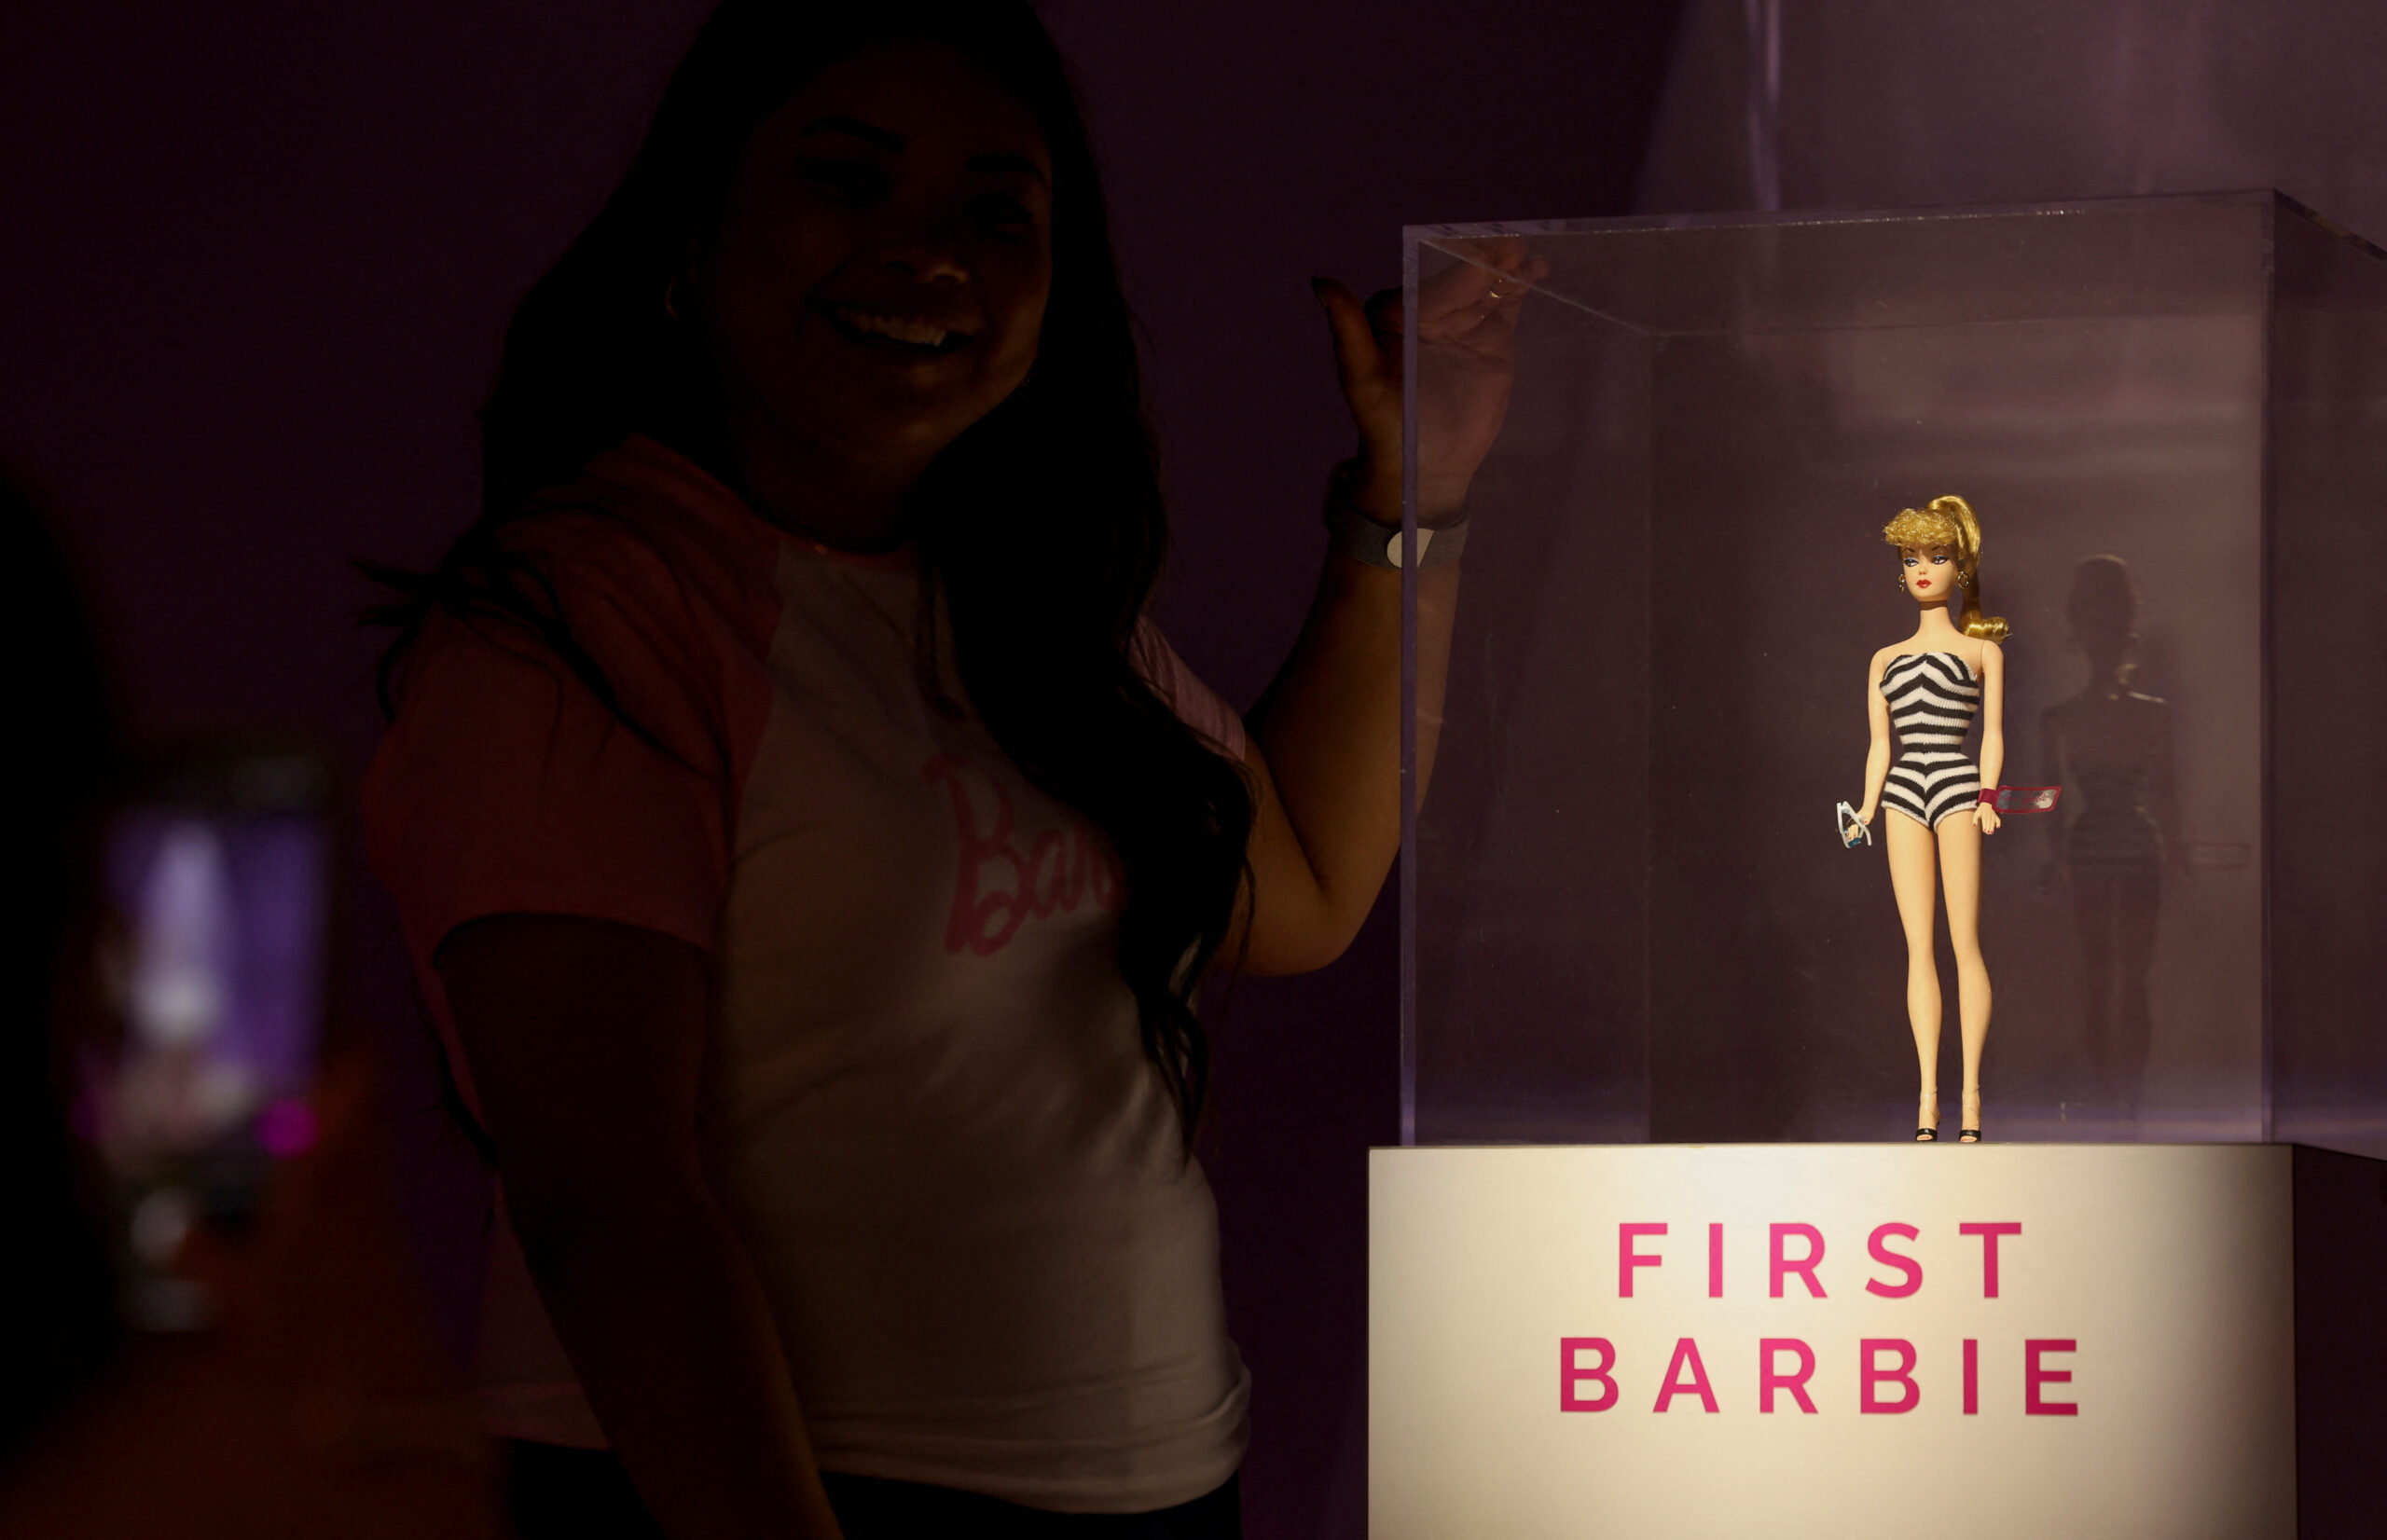 World of Barbie immersive experience preview in Santa Monica